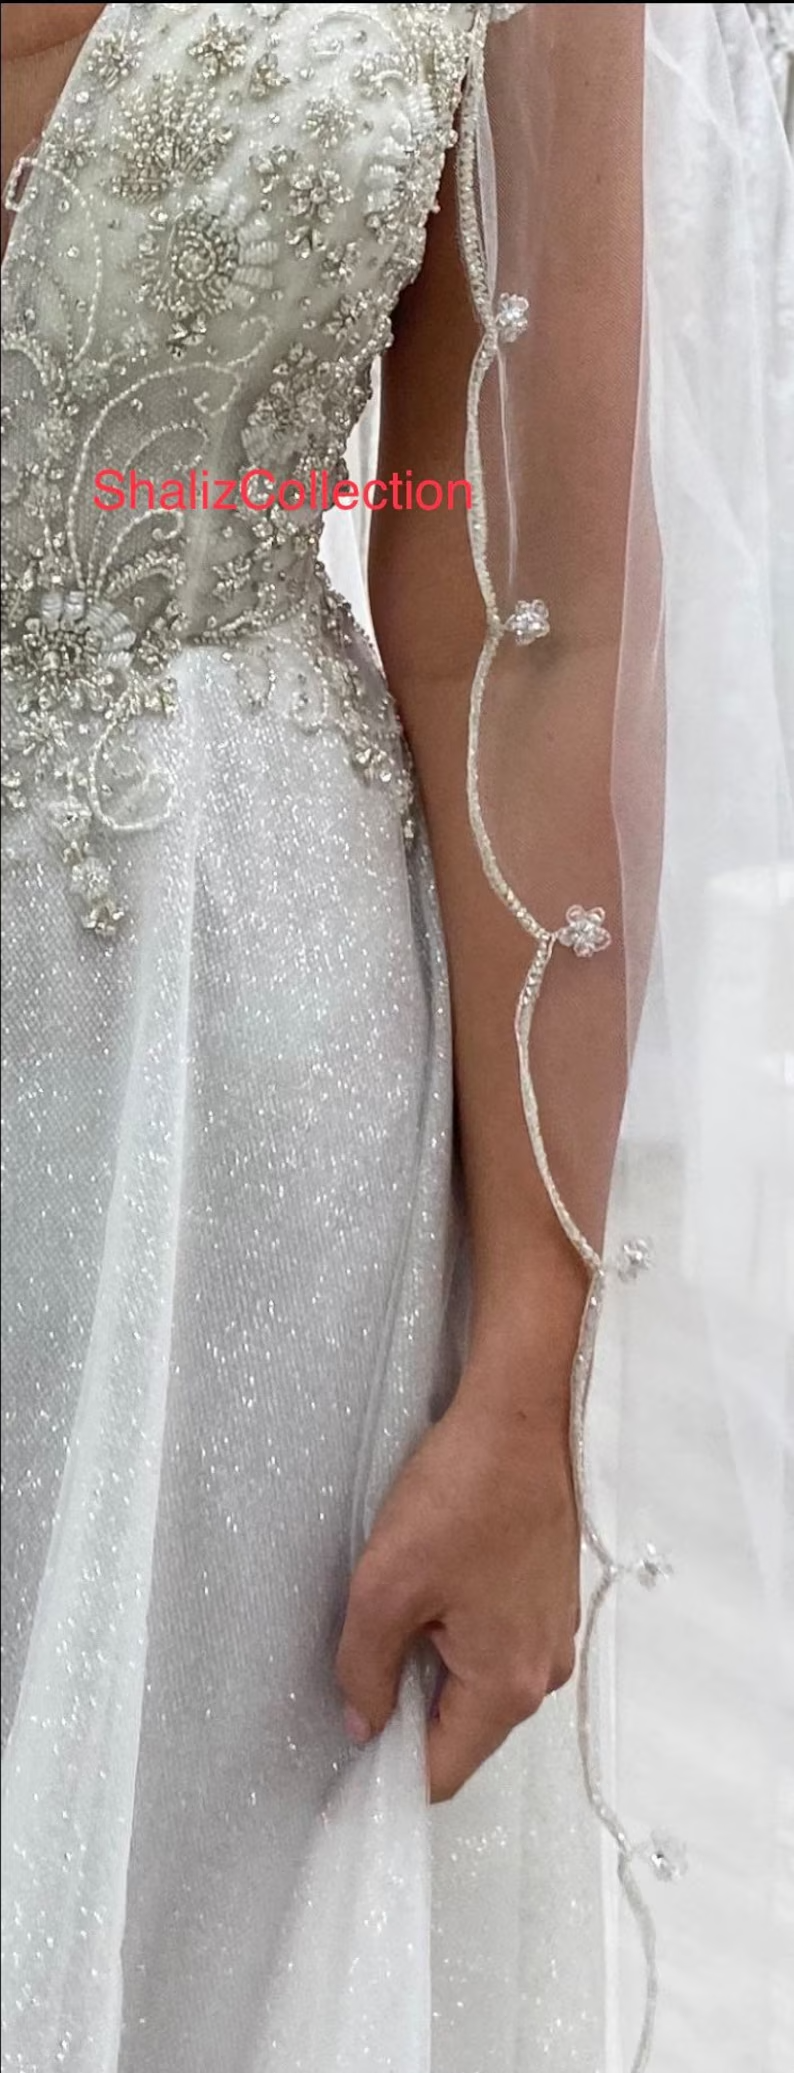 One of kind Wedding Veil, Beaded, Rhinestone and Crystal veil with amazing details, Free Tulle samples